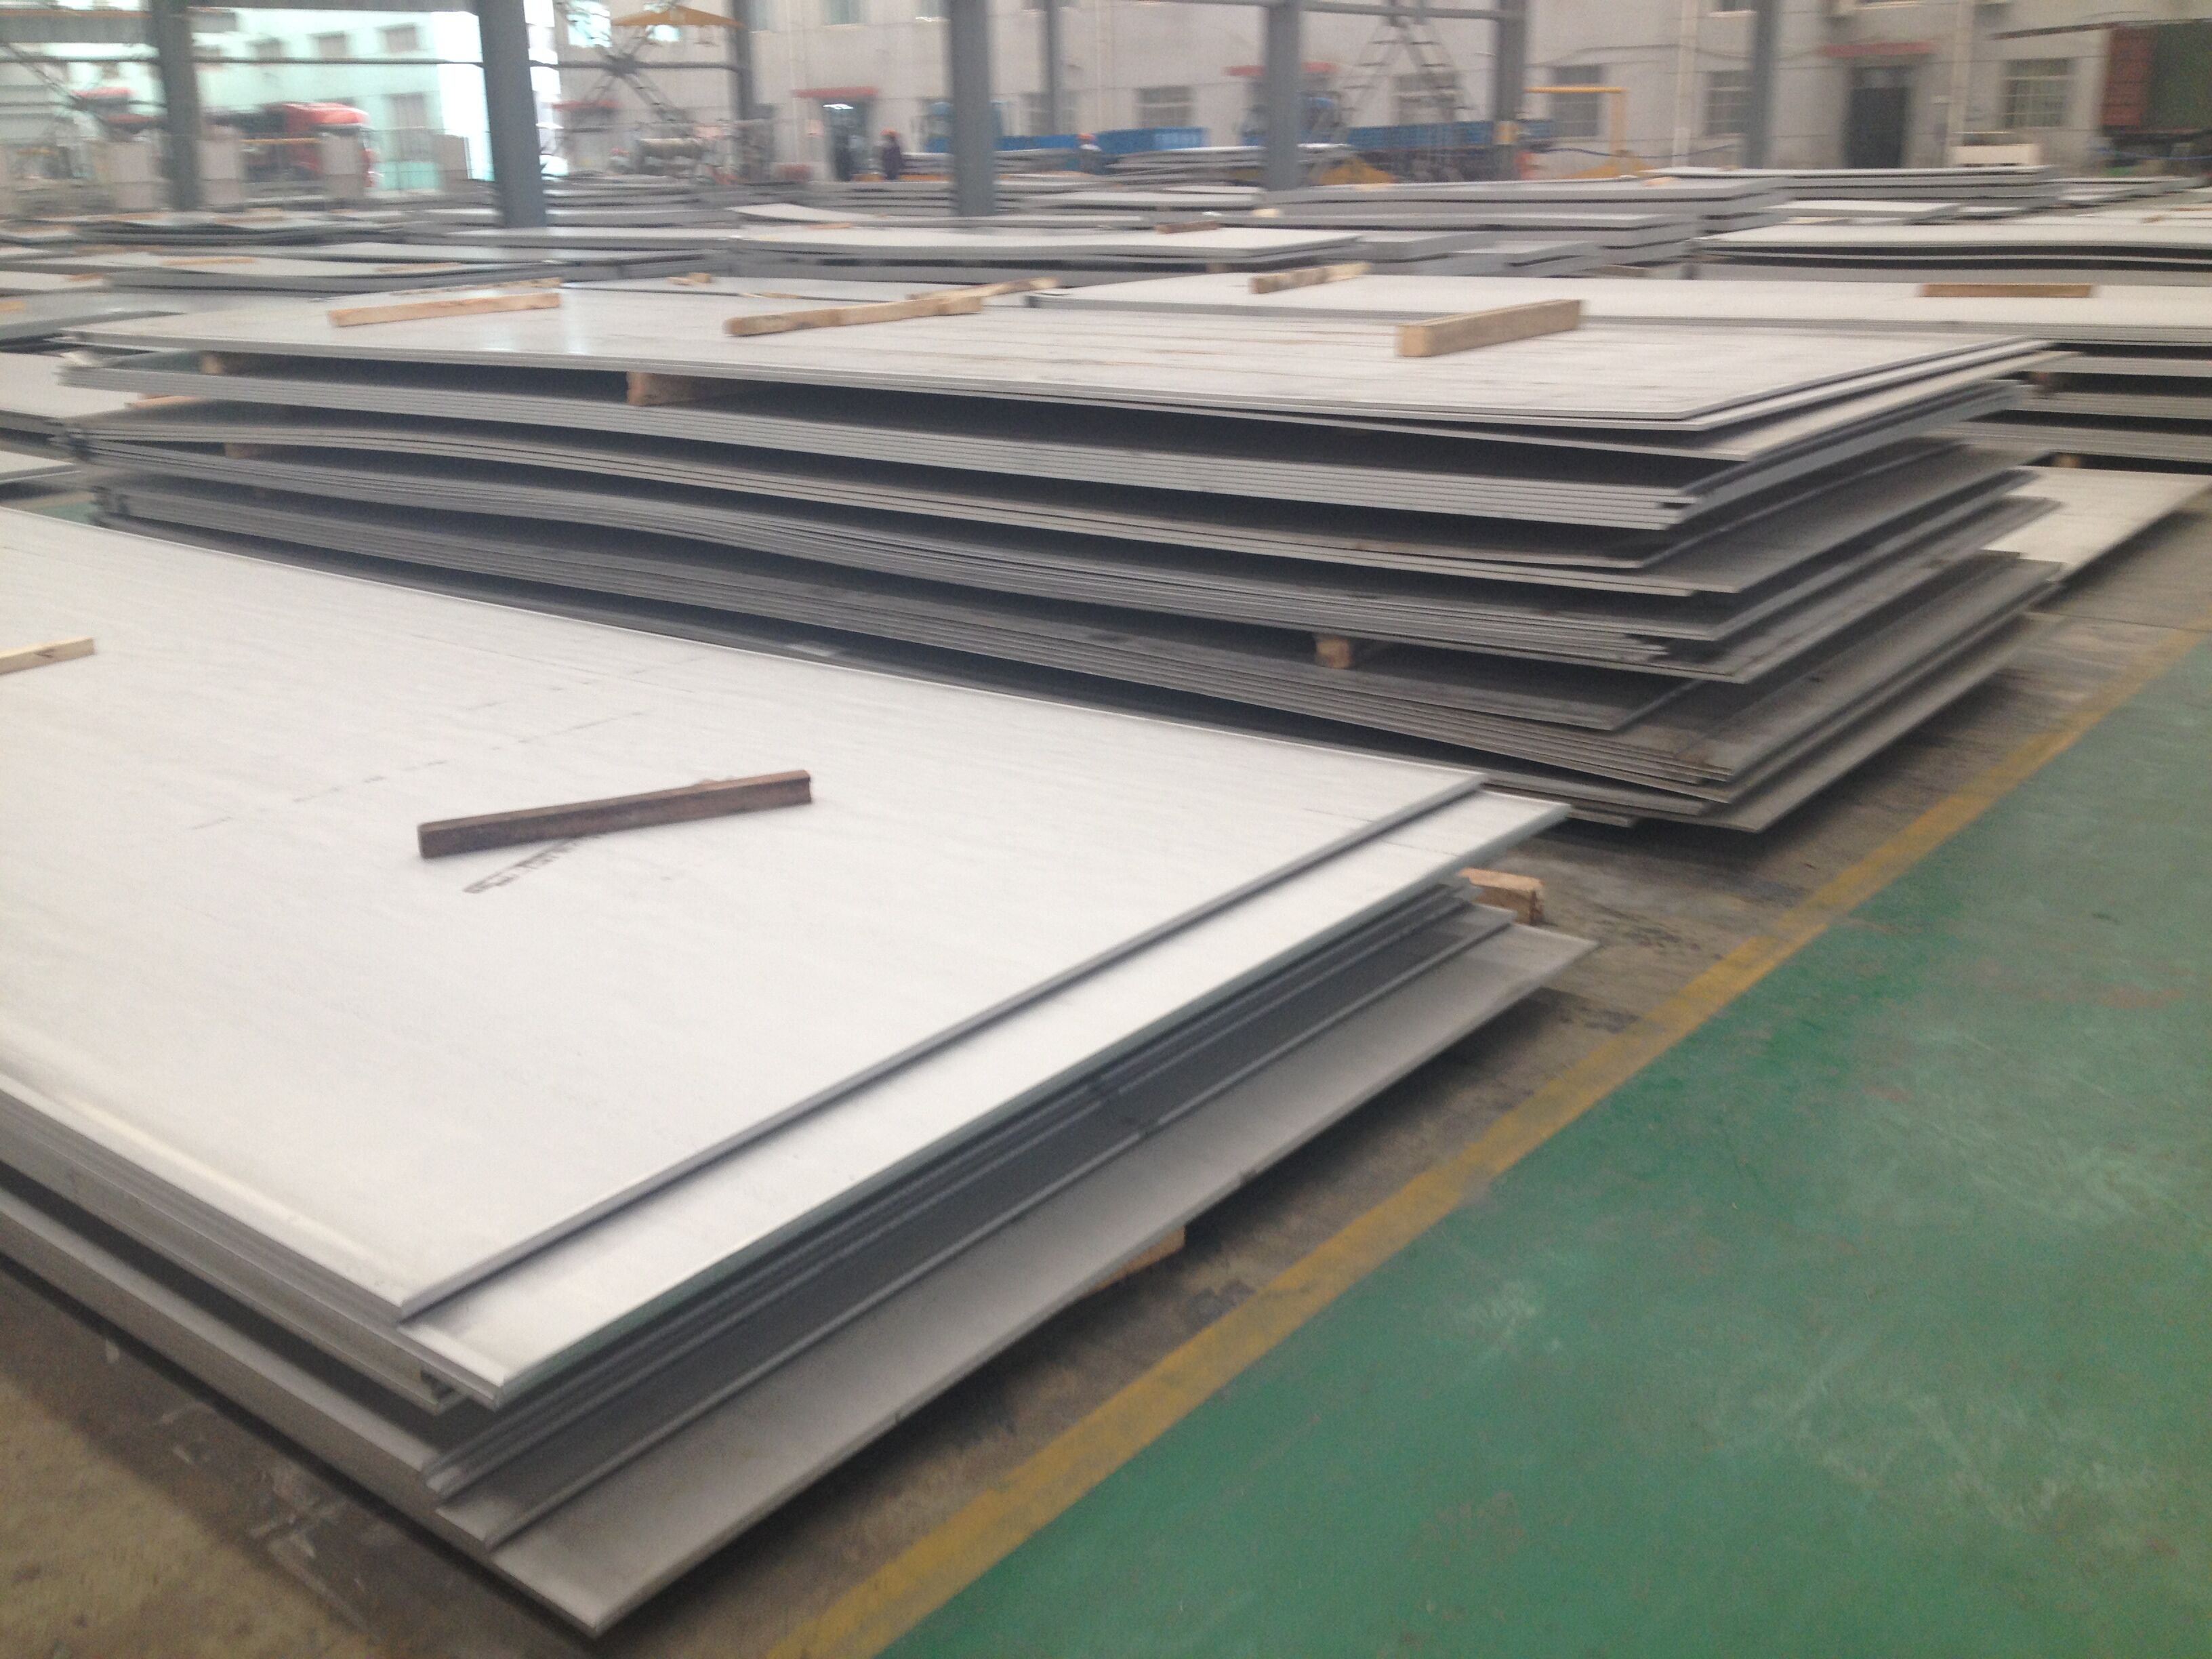 China Wholesale China Hot Rolled Steel Sheet Suppliers - 440 stainless steel plate  440stainless steel coil – Wenyue